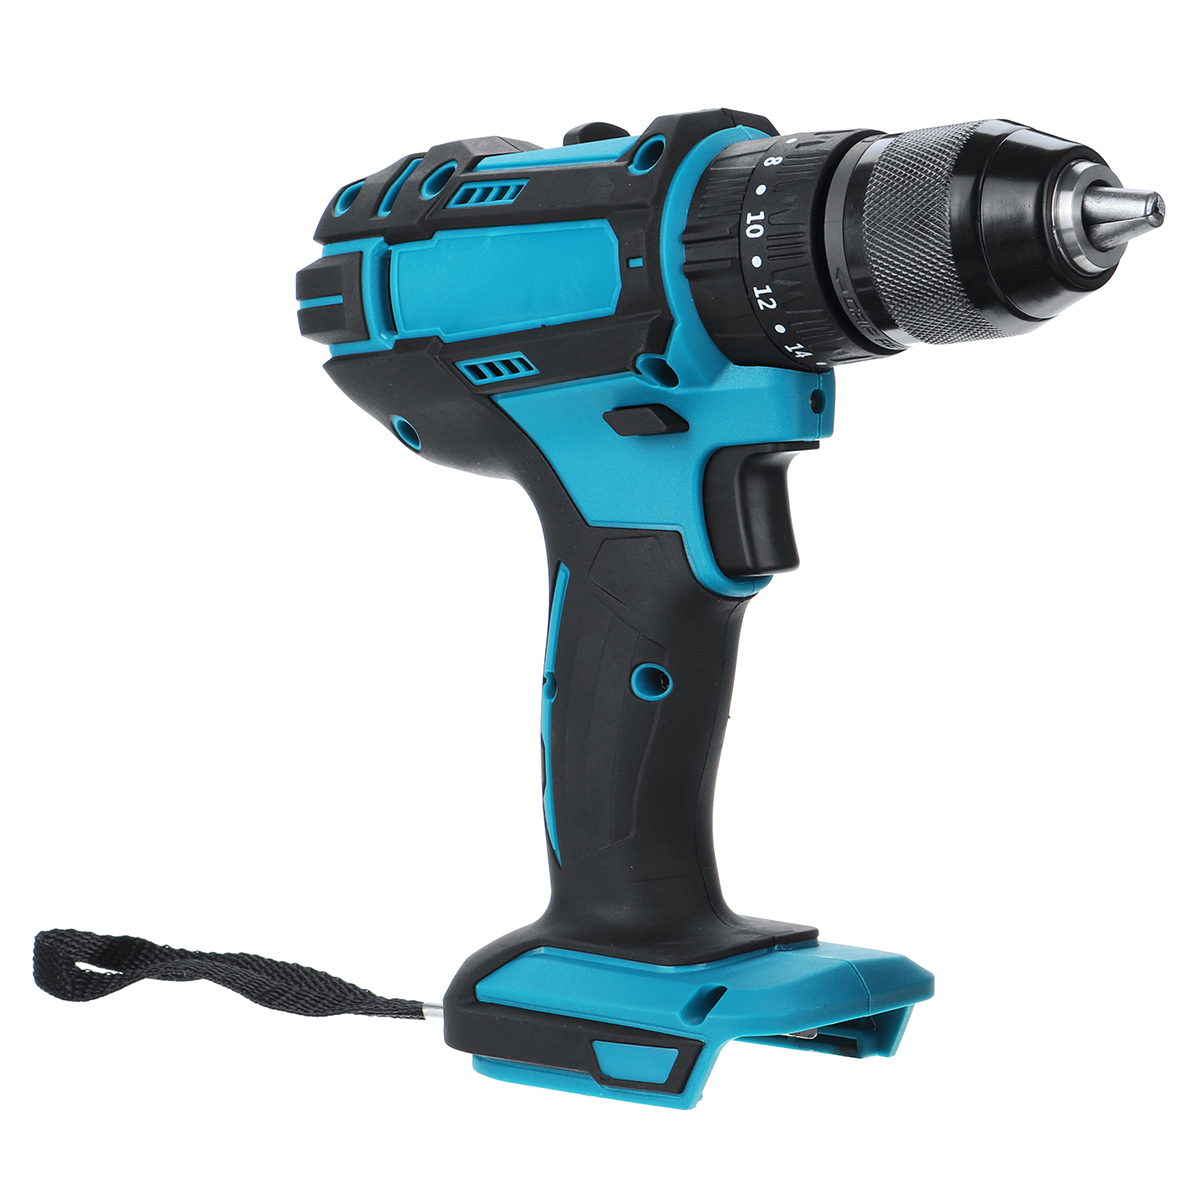 10mm-Chuck-Impact-Drill-350Nm-Cordless-Electric-Drill-For-Makita-18V-Battery-4000RPM-LED-Light-Power-1642853-11